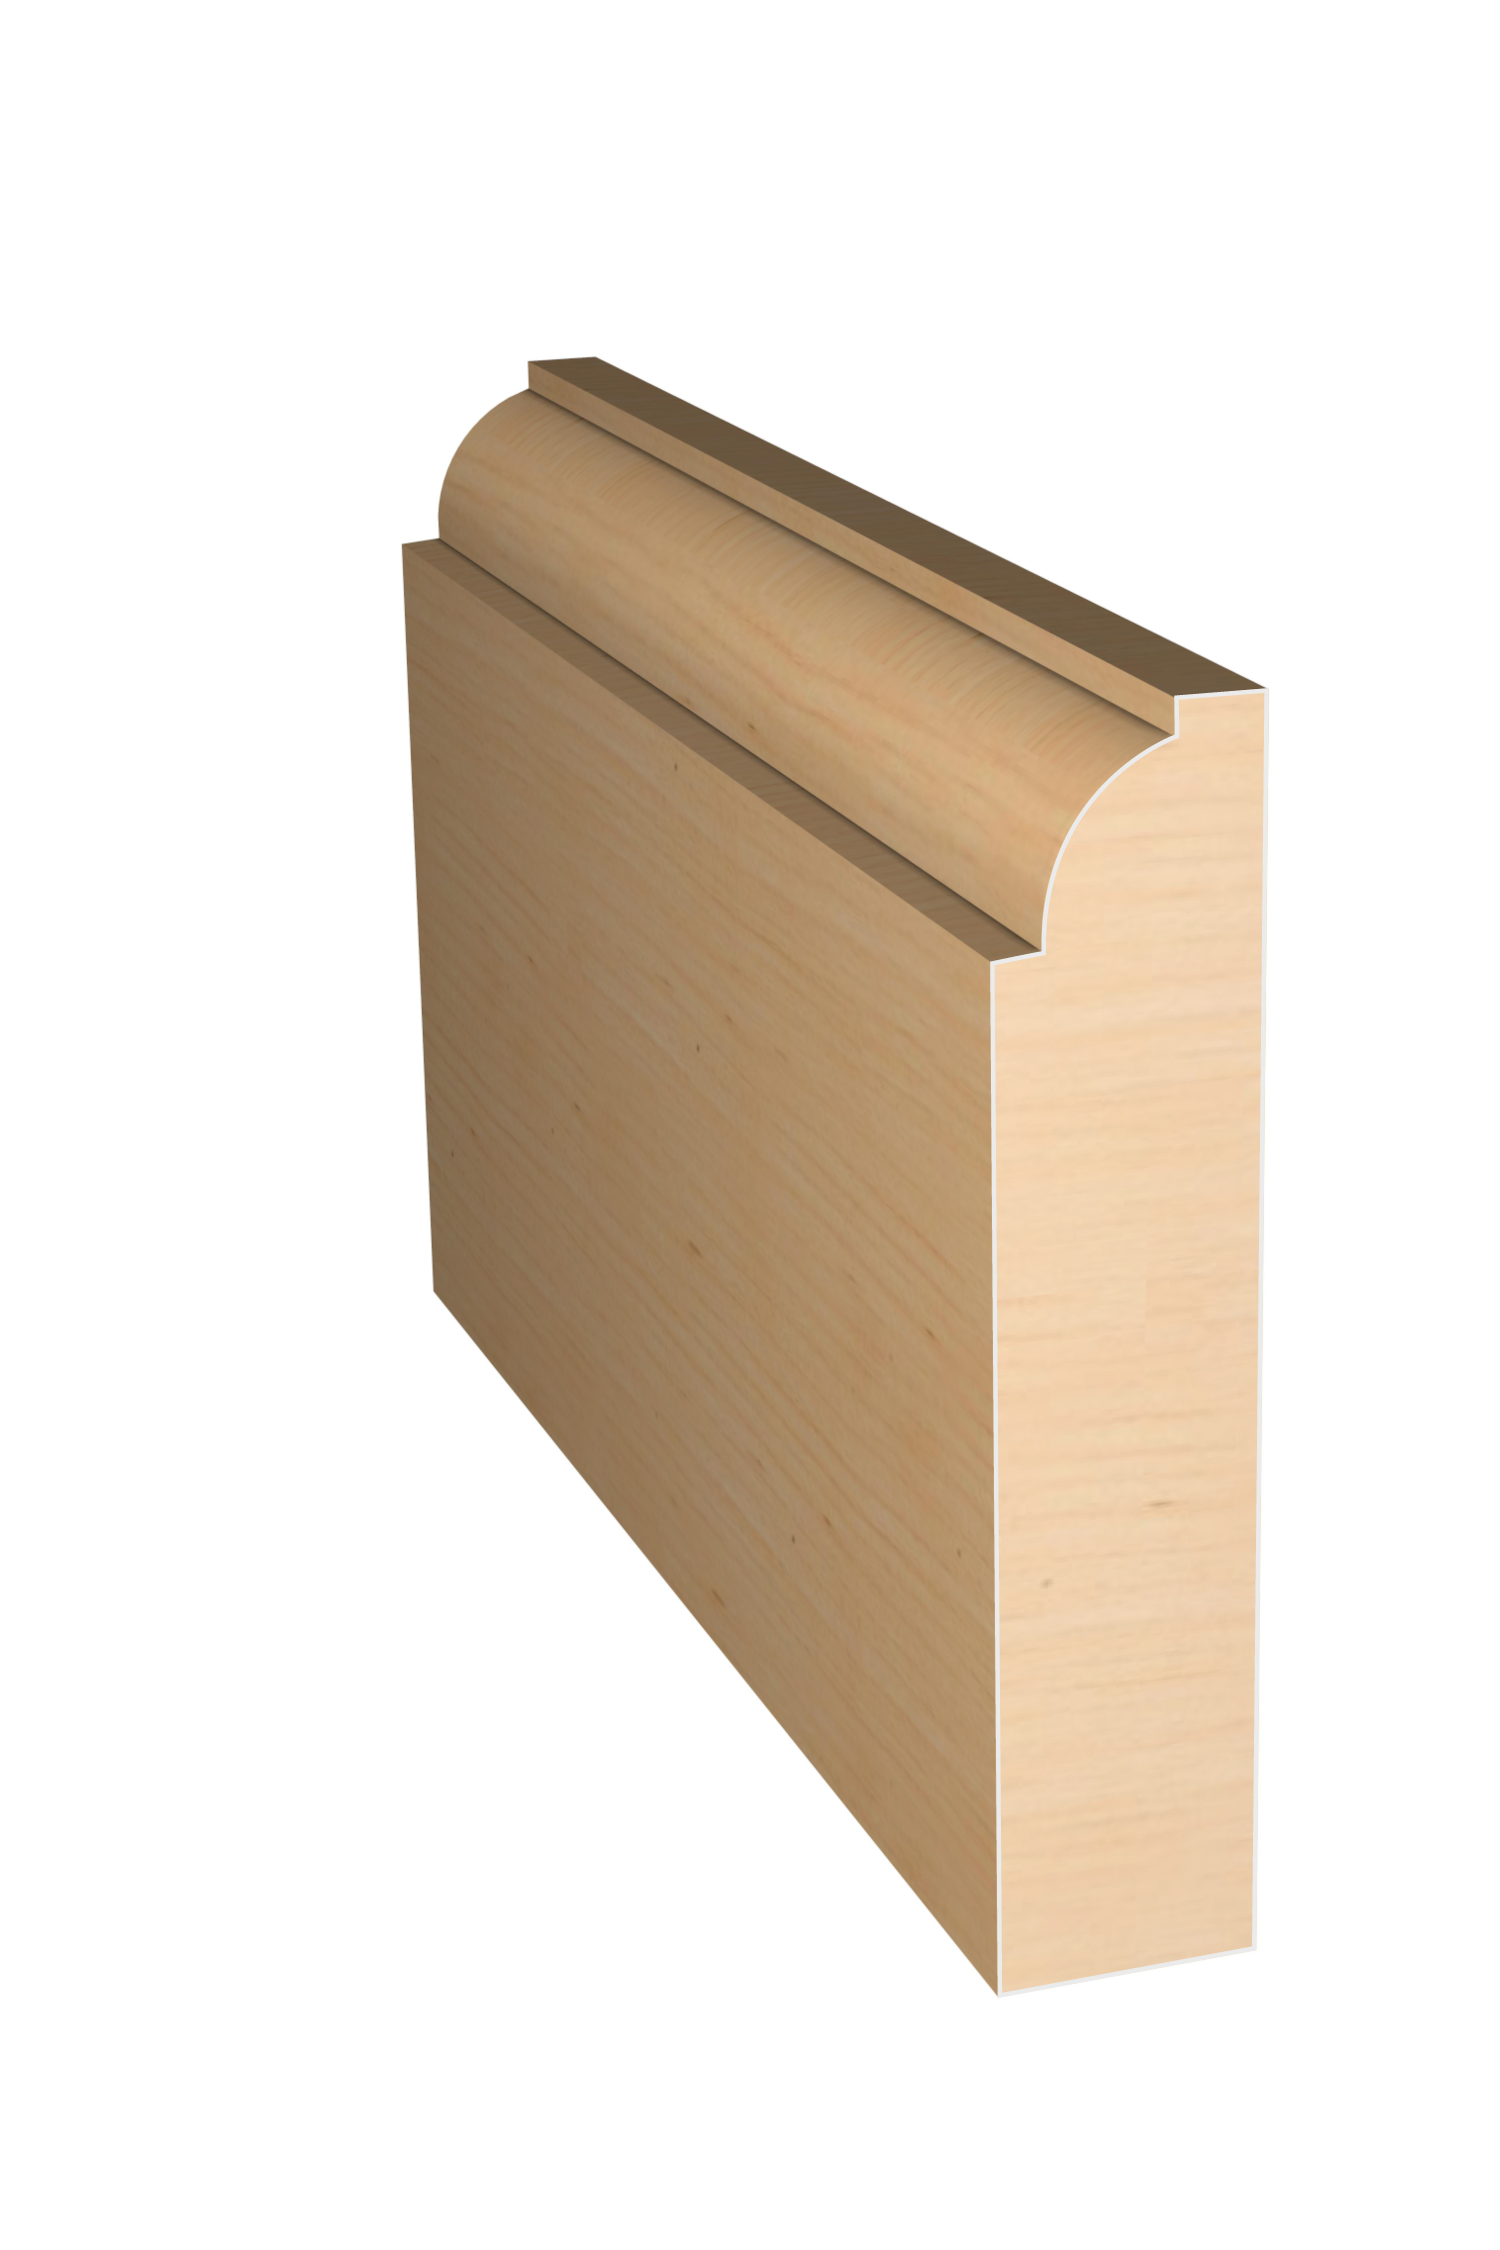 Three dimensional rendering of custom casing wood molding CAPL31231 made by Public Lumber Company in Detroit.